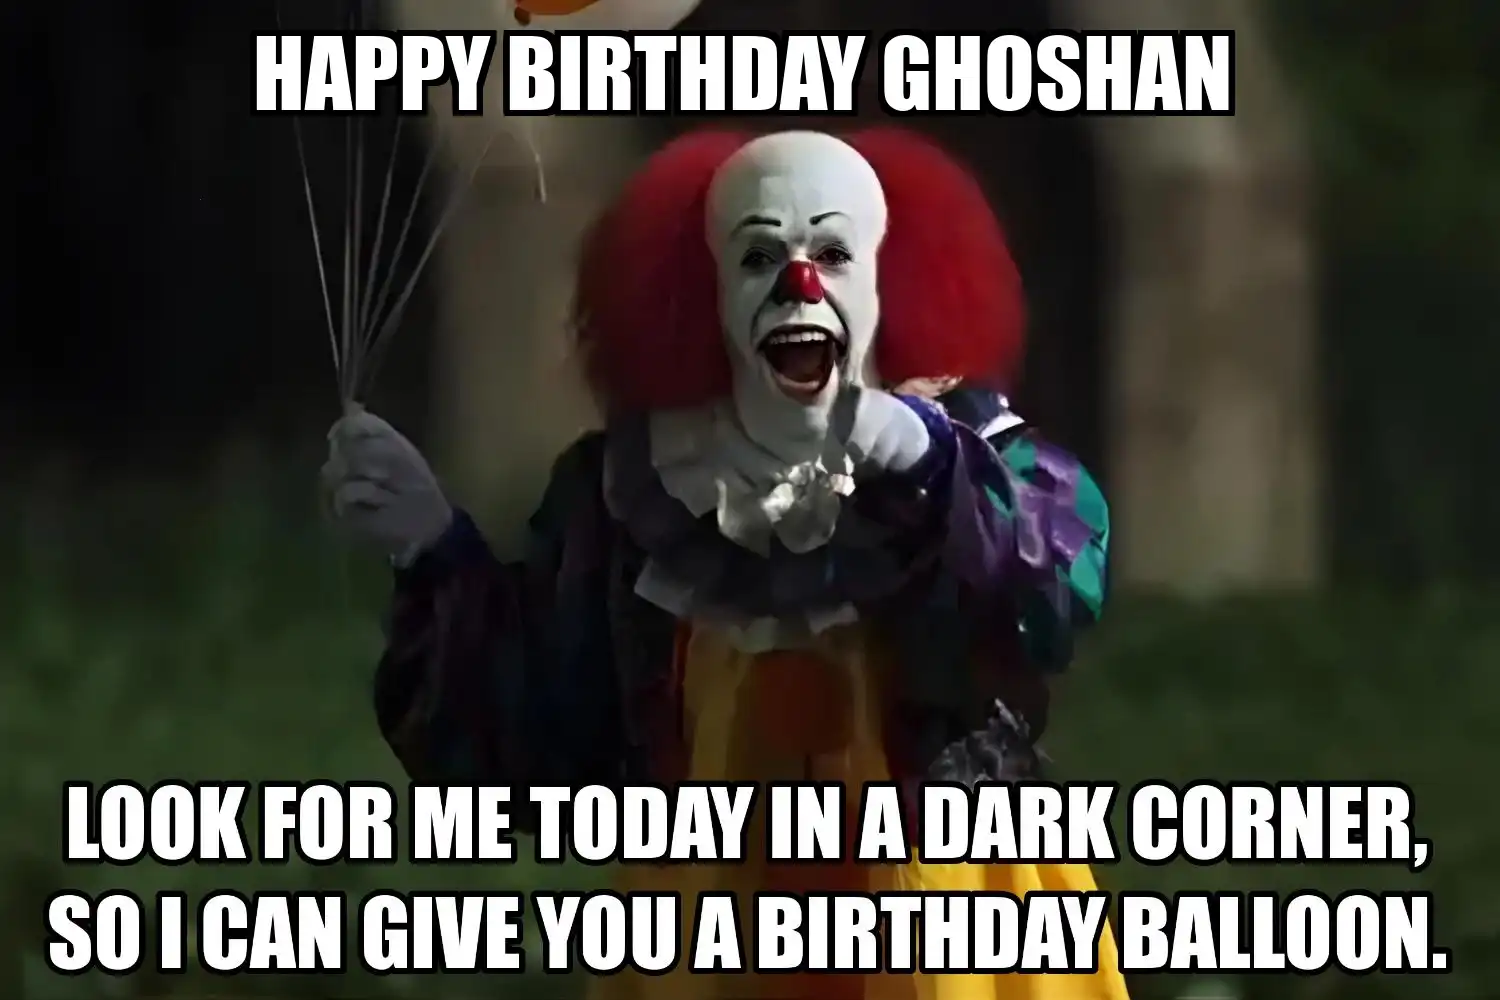 Happy Birthday Ghoshan I Can Give You A Balloon Meme